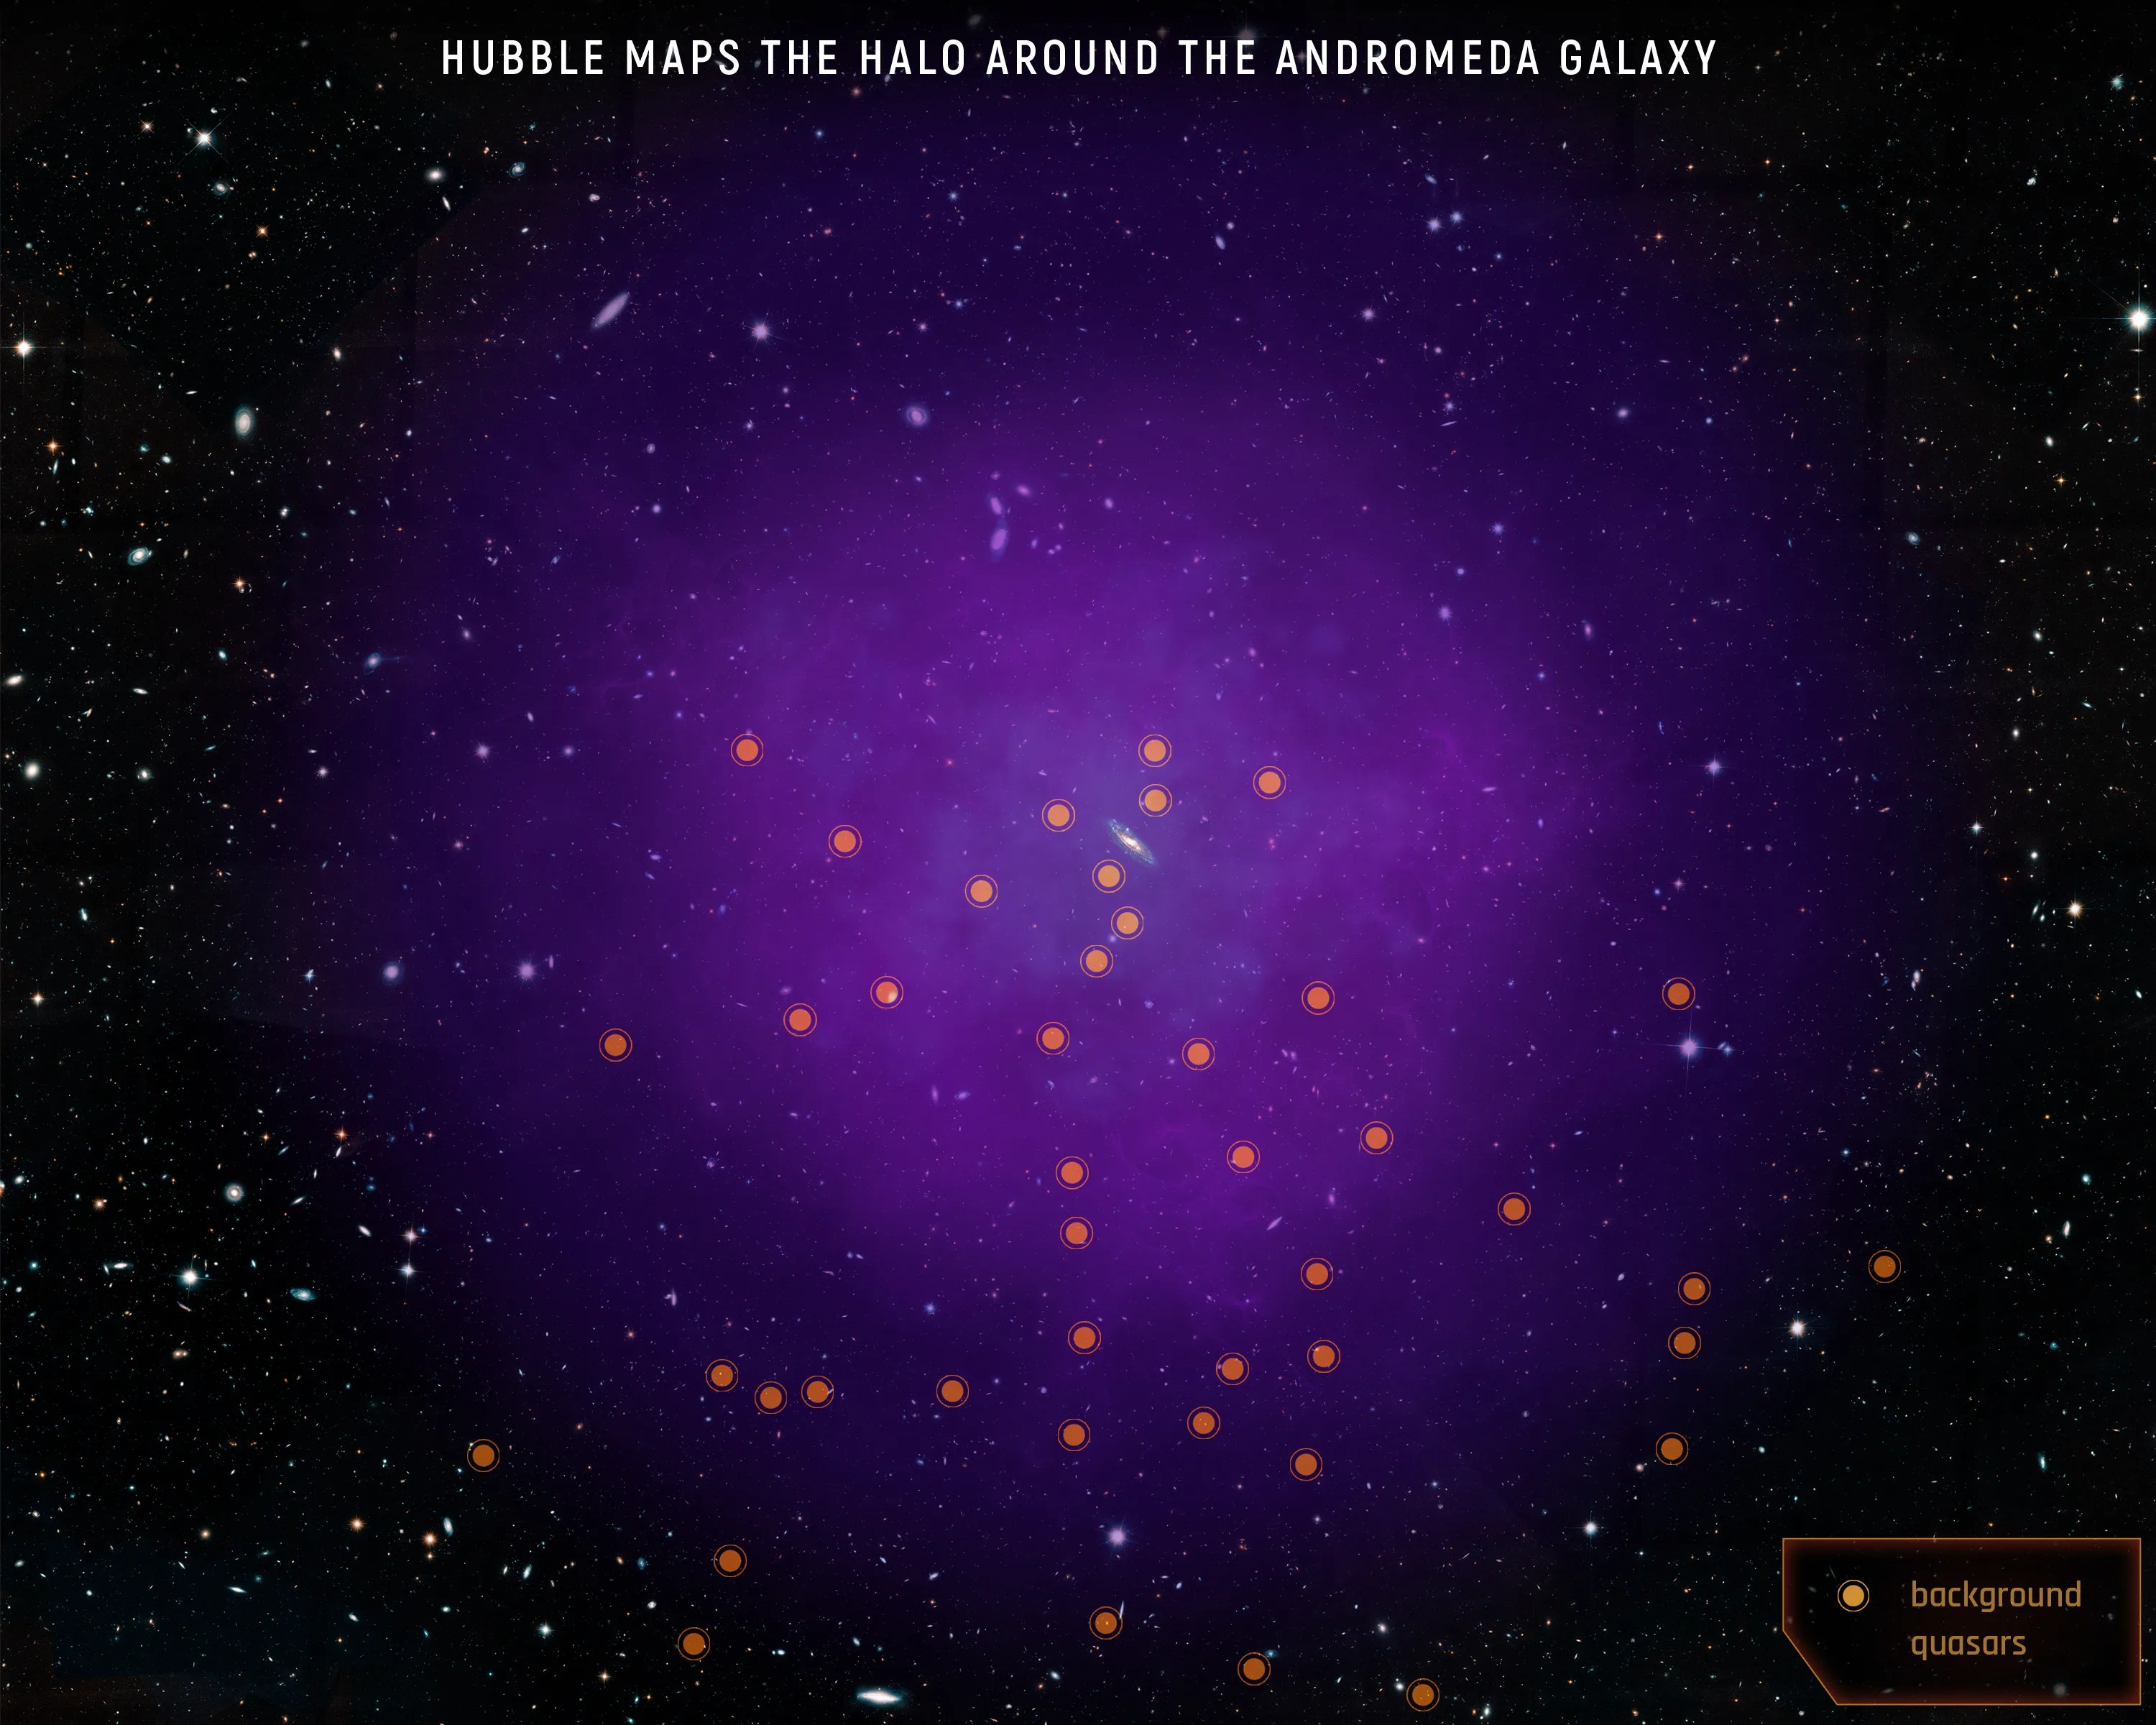 purple-hued illustration of Andromeda galaxy's halo, with background quasars (shown with yellowish dots) scattered throughout